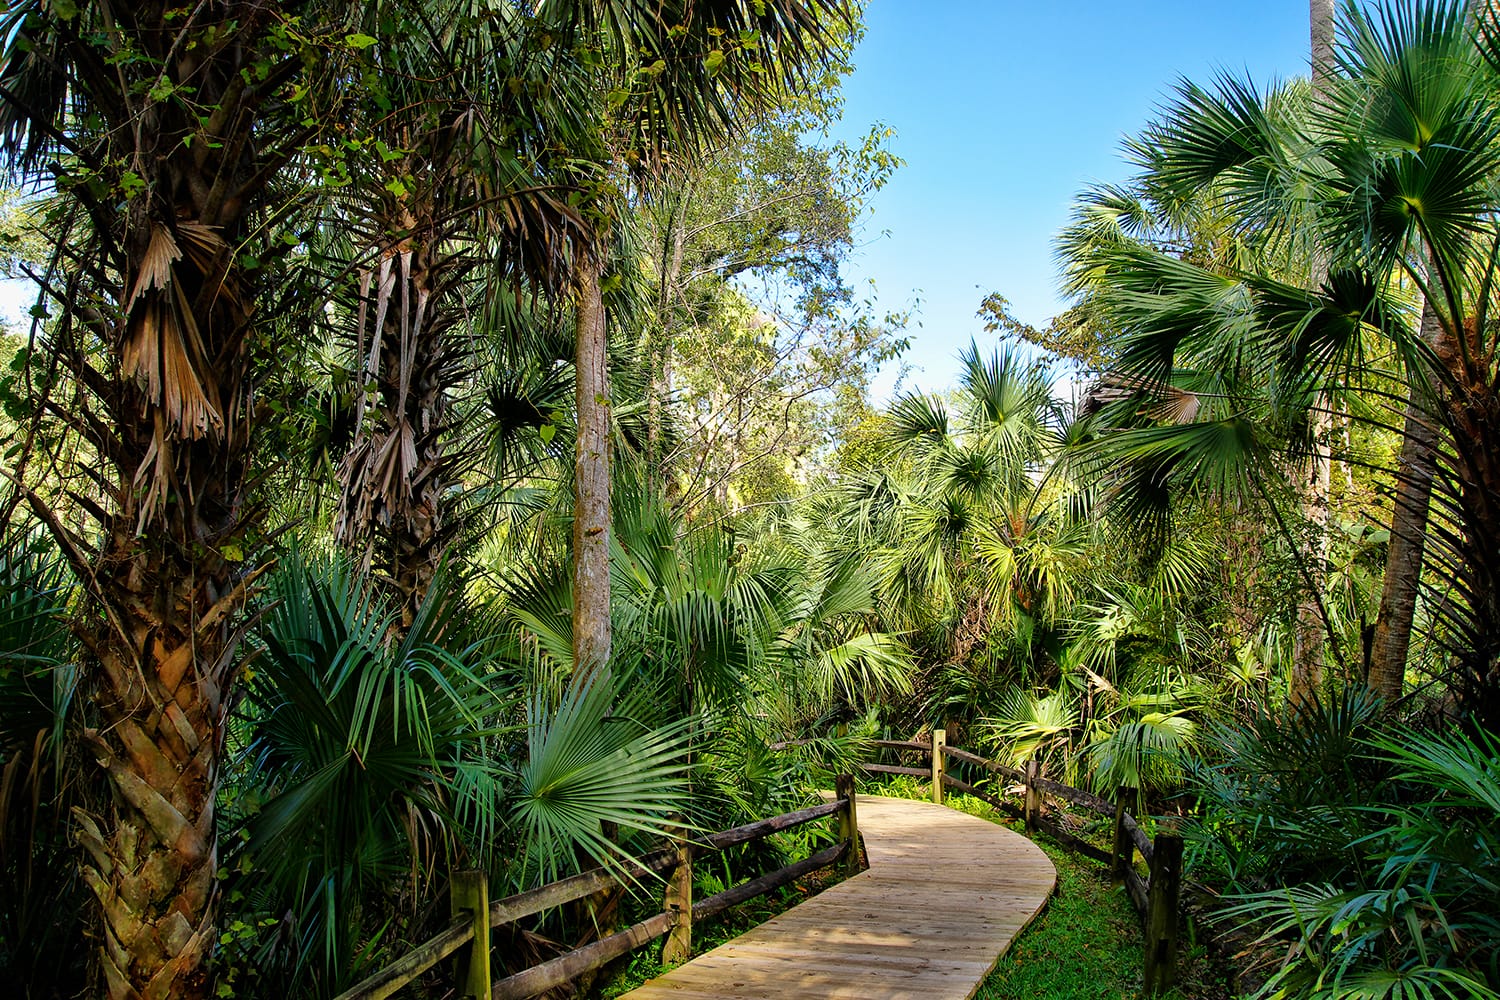 Wooden boardwalk in the Ocala National Forest